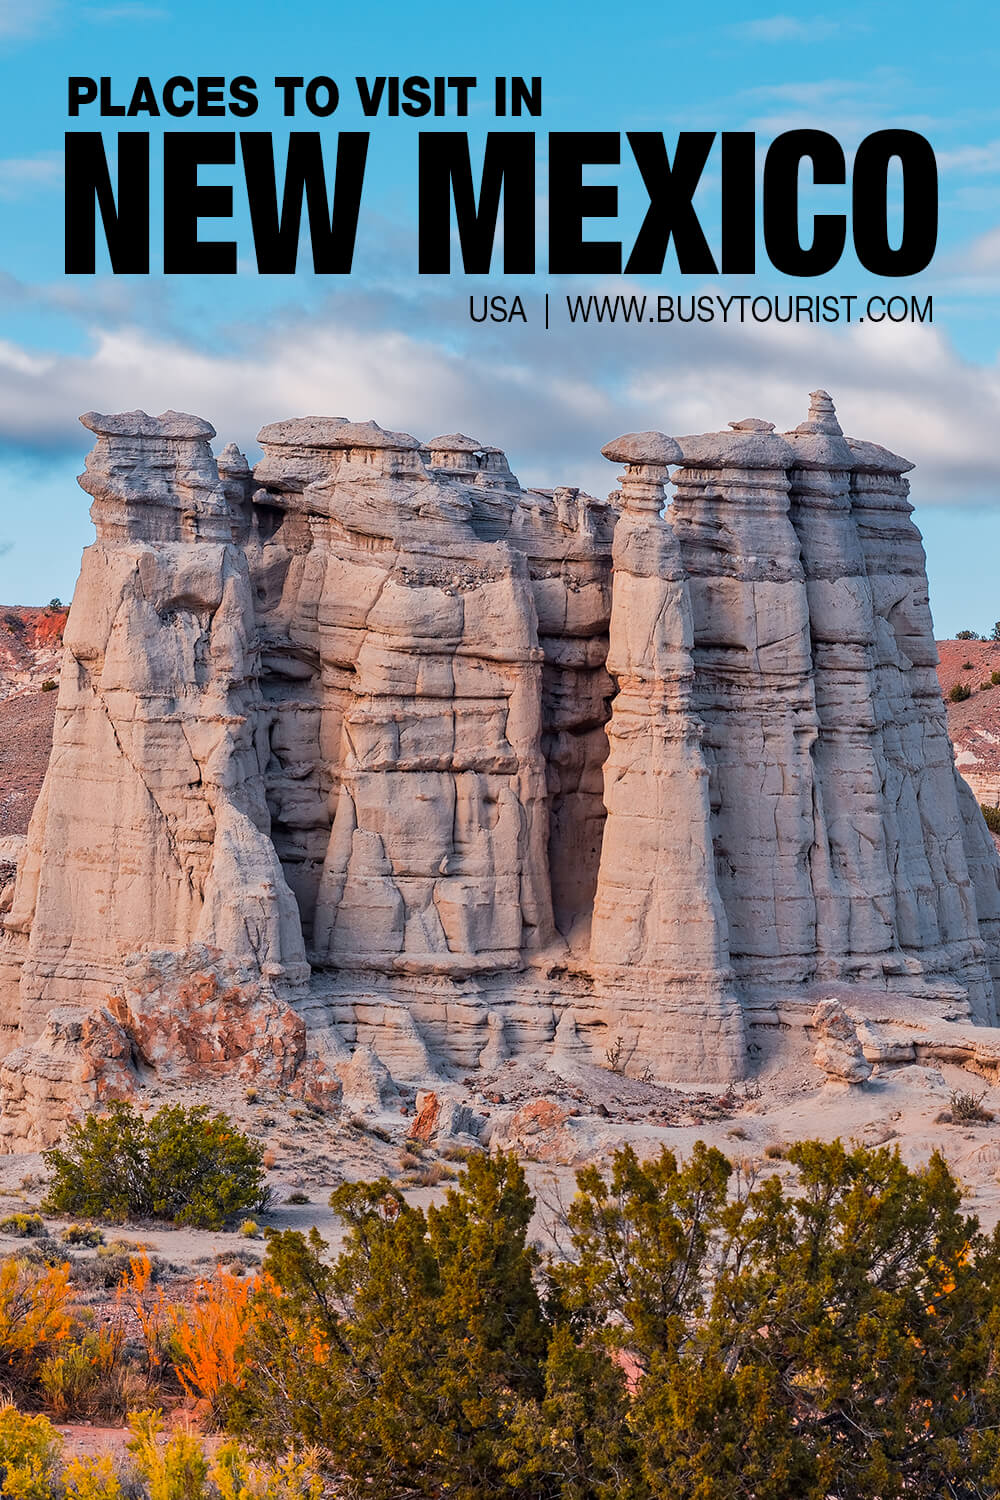 41 Things To Do & Places To Visit In New Mexico - Attractions & Activities